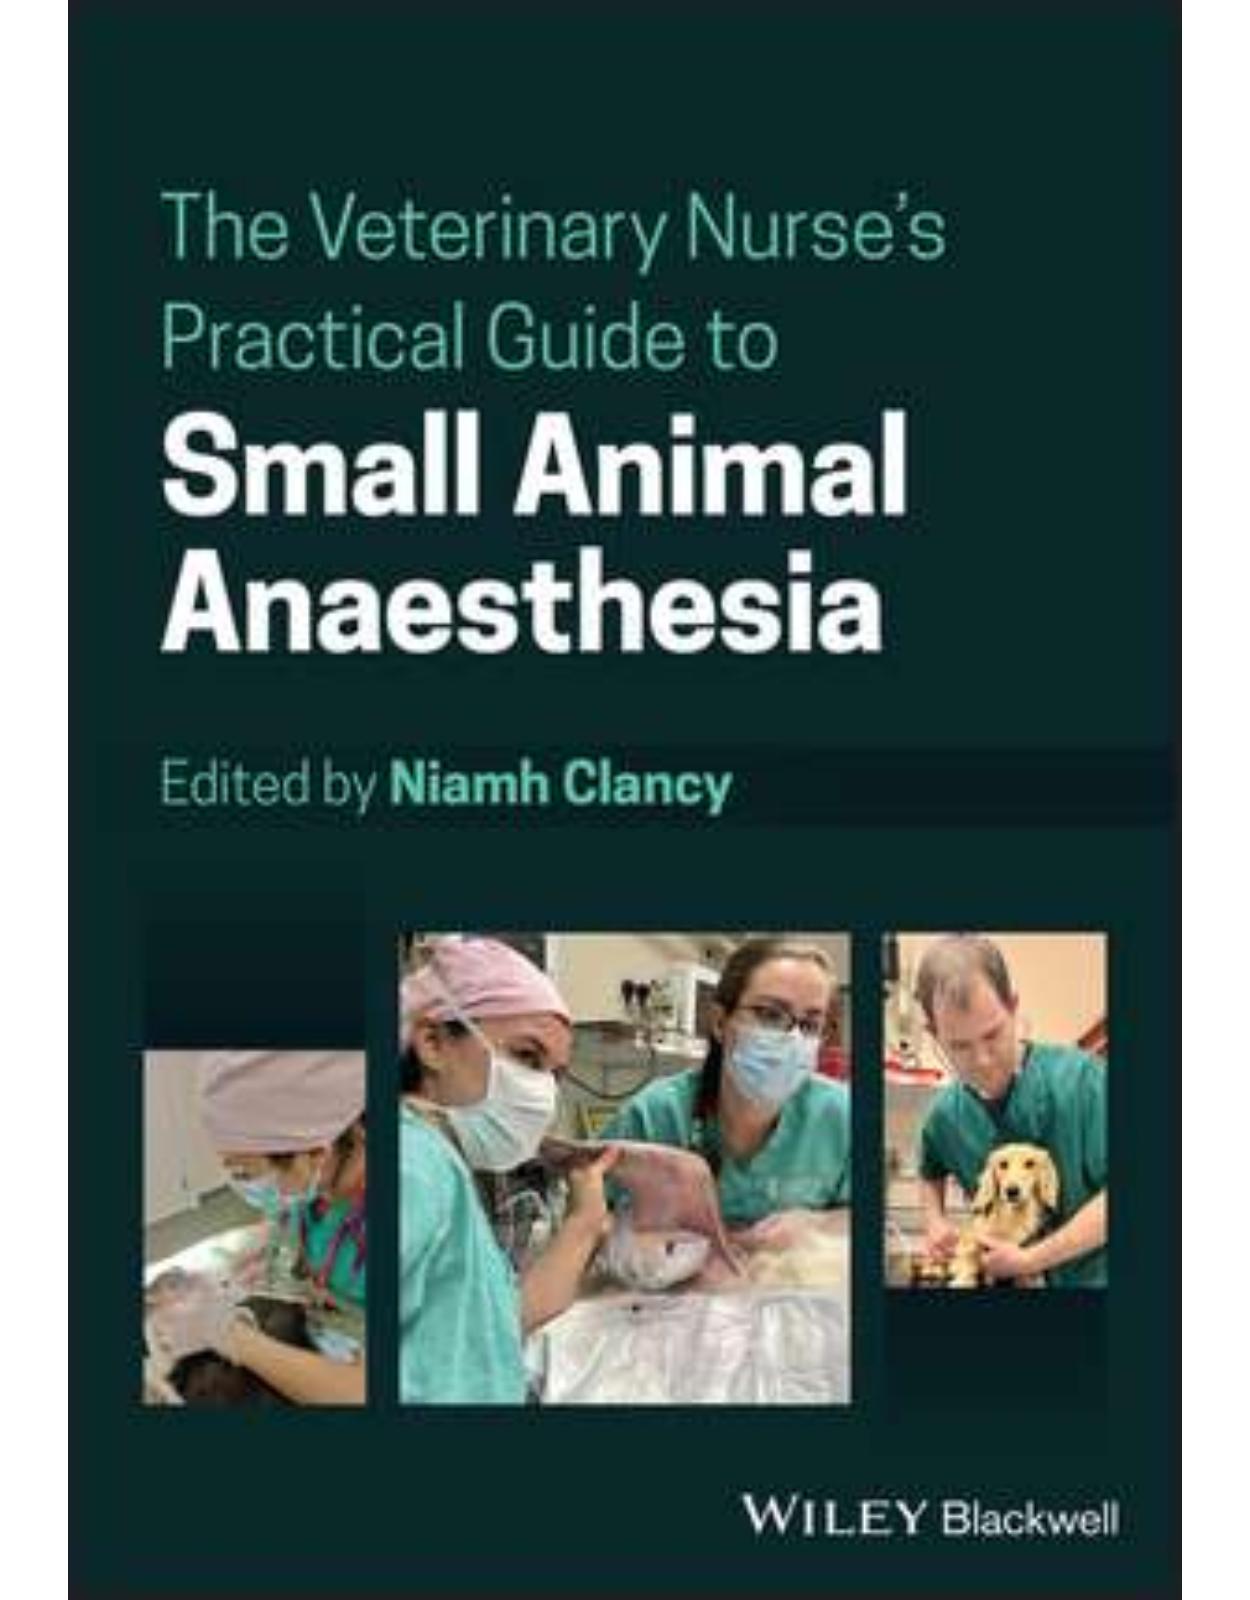 The Veterinary Nurse′s Practical Guide to Small Animal Anaesthesia